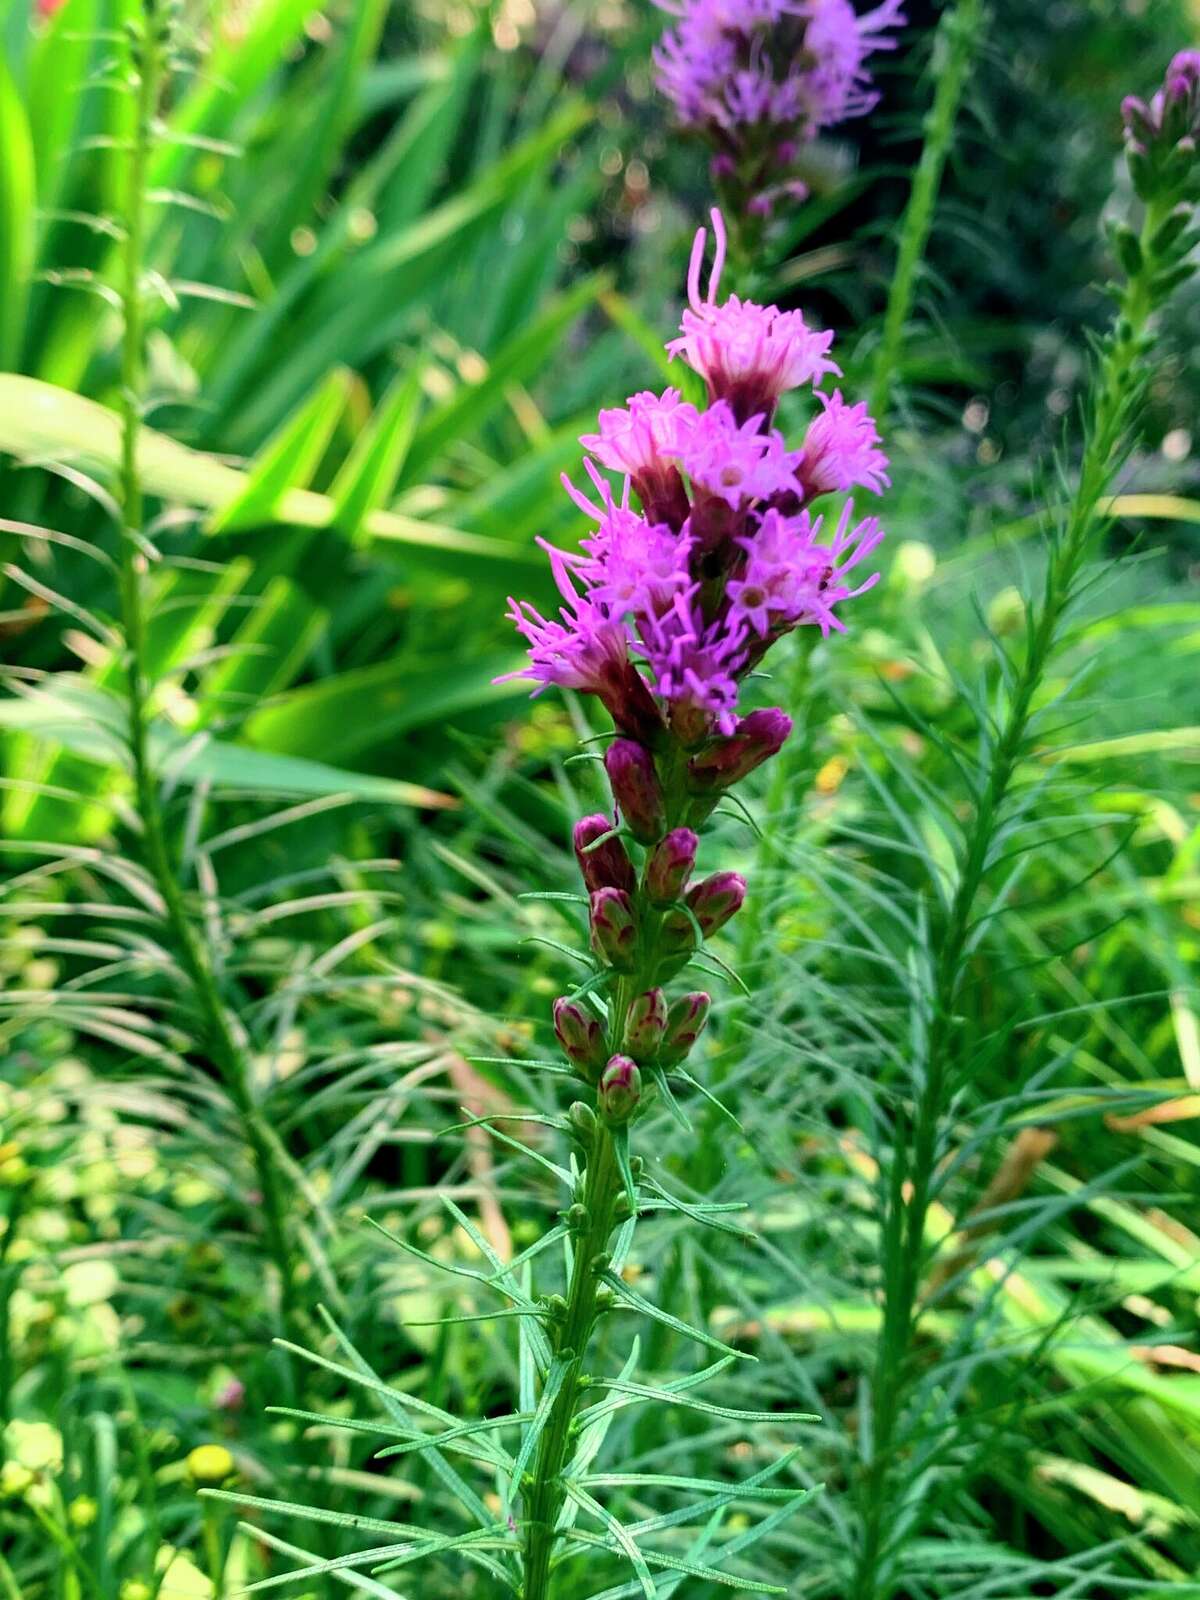 Liatris spicata, commonly called blazing star or gay feather, is a recommended alternative for invasive purple loosestrife.